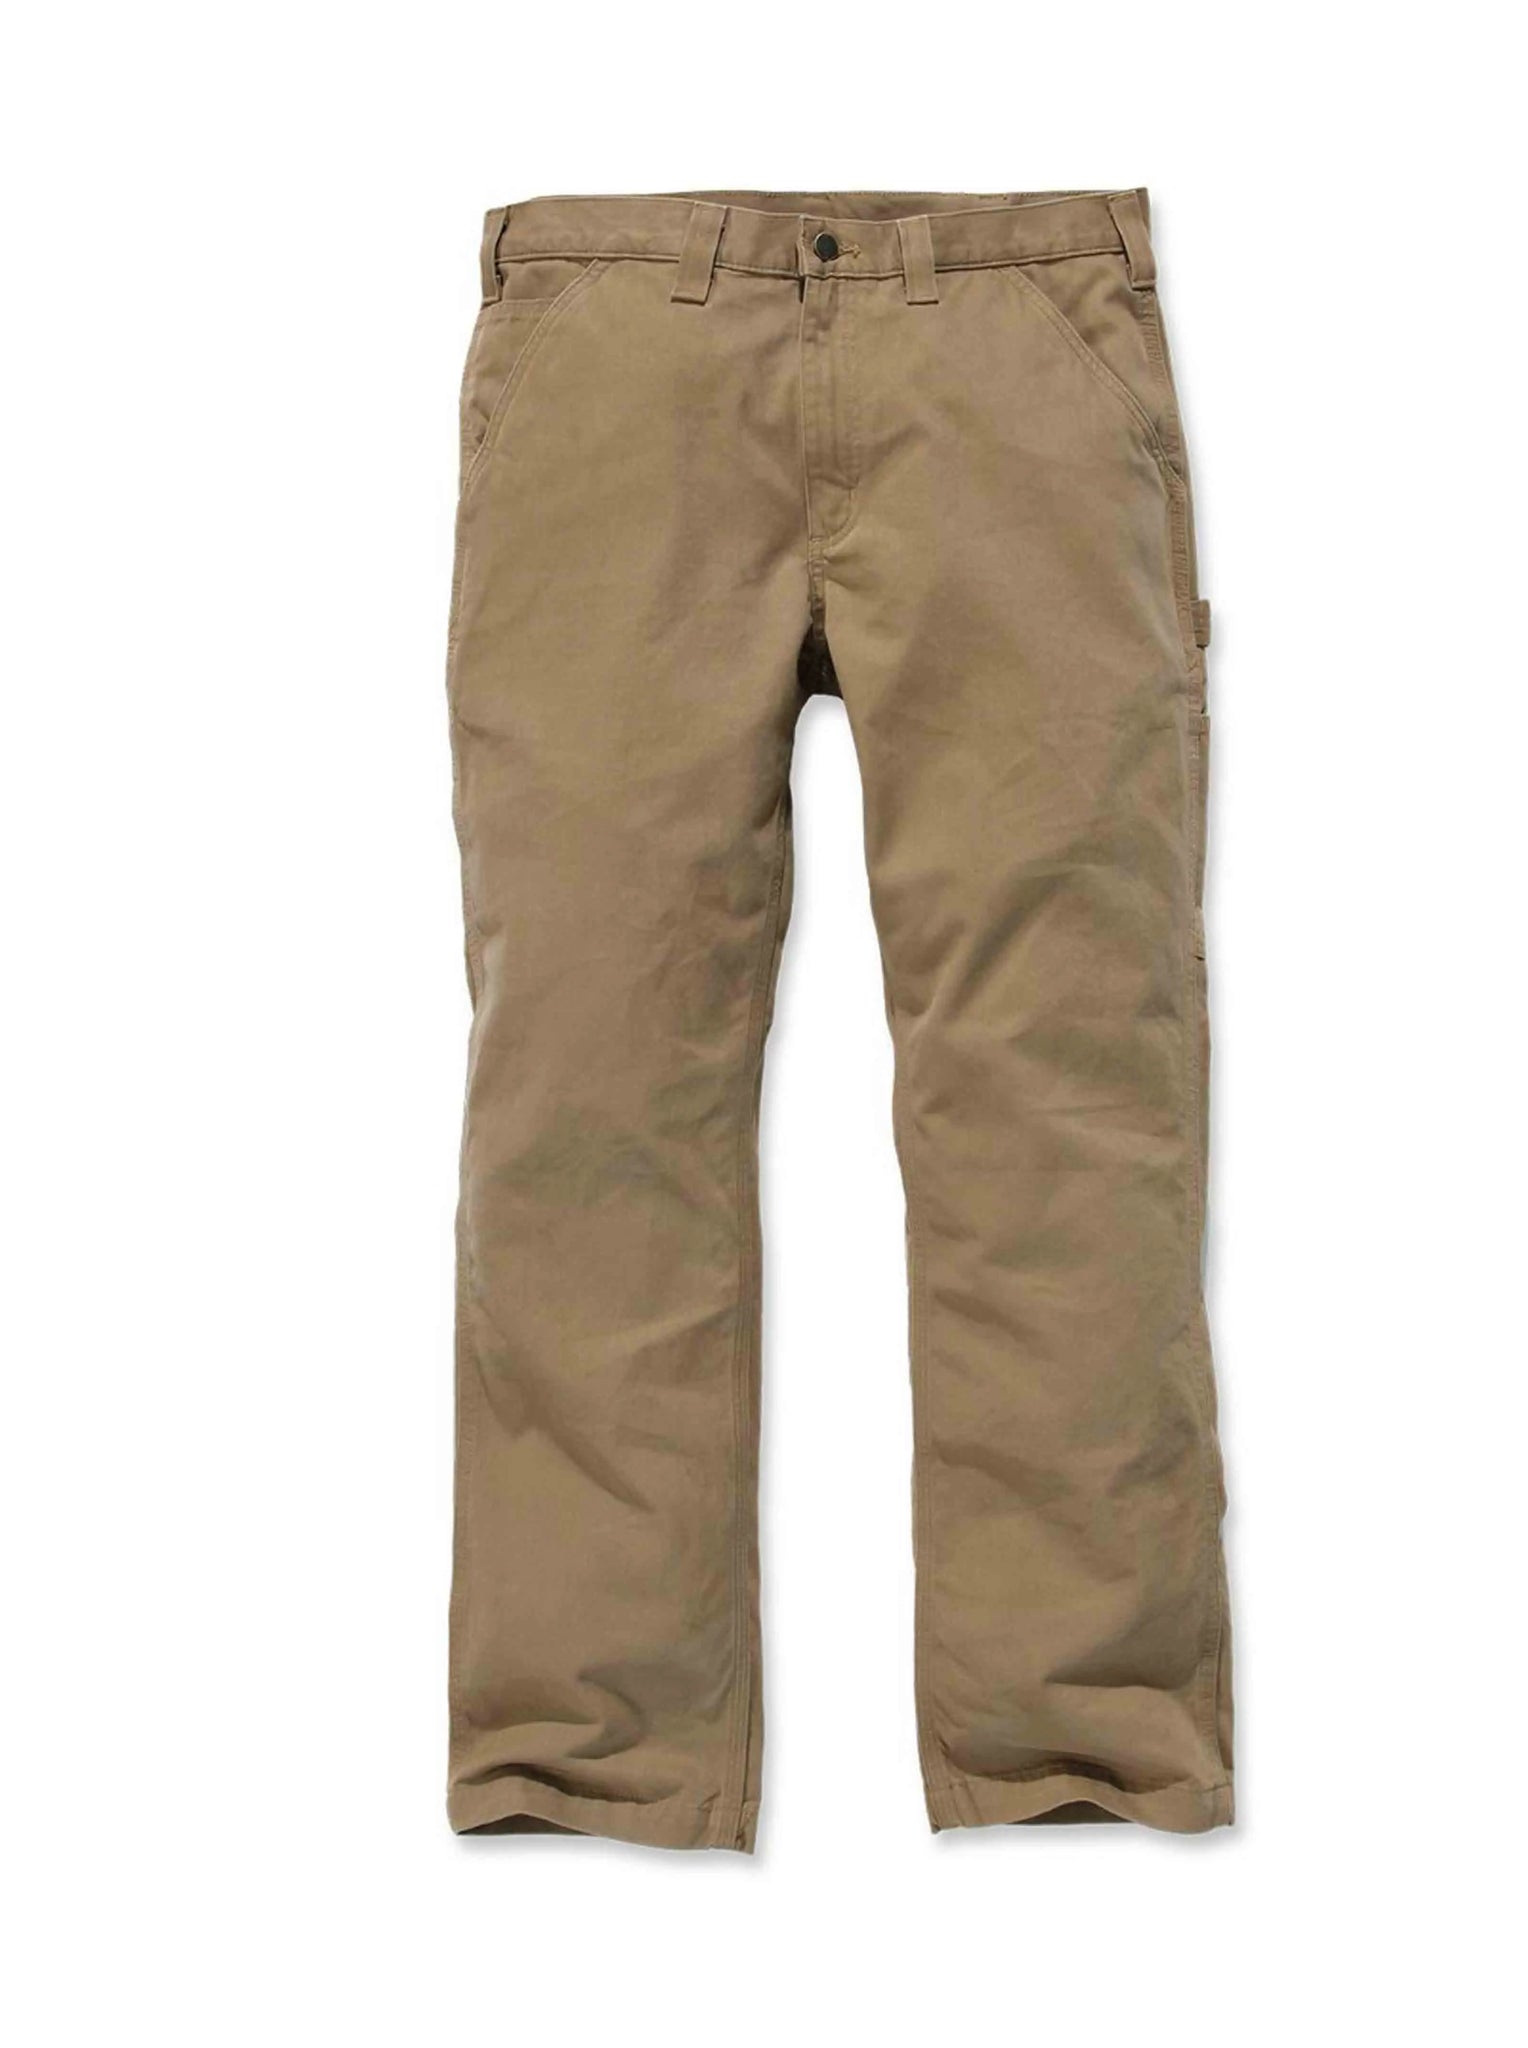 Carhartt Washed Twill Relaxed Fit Pant Dark Khaki Prior